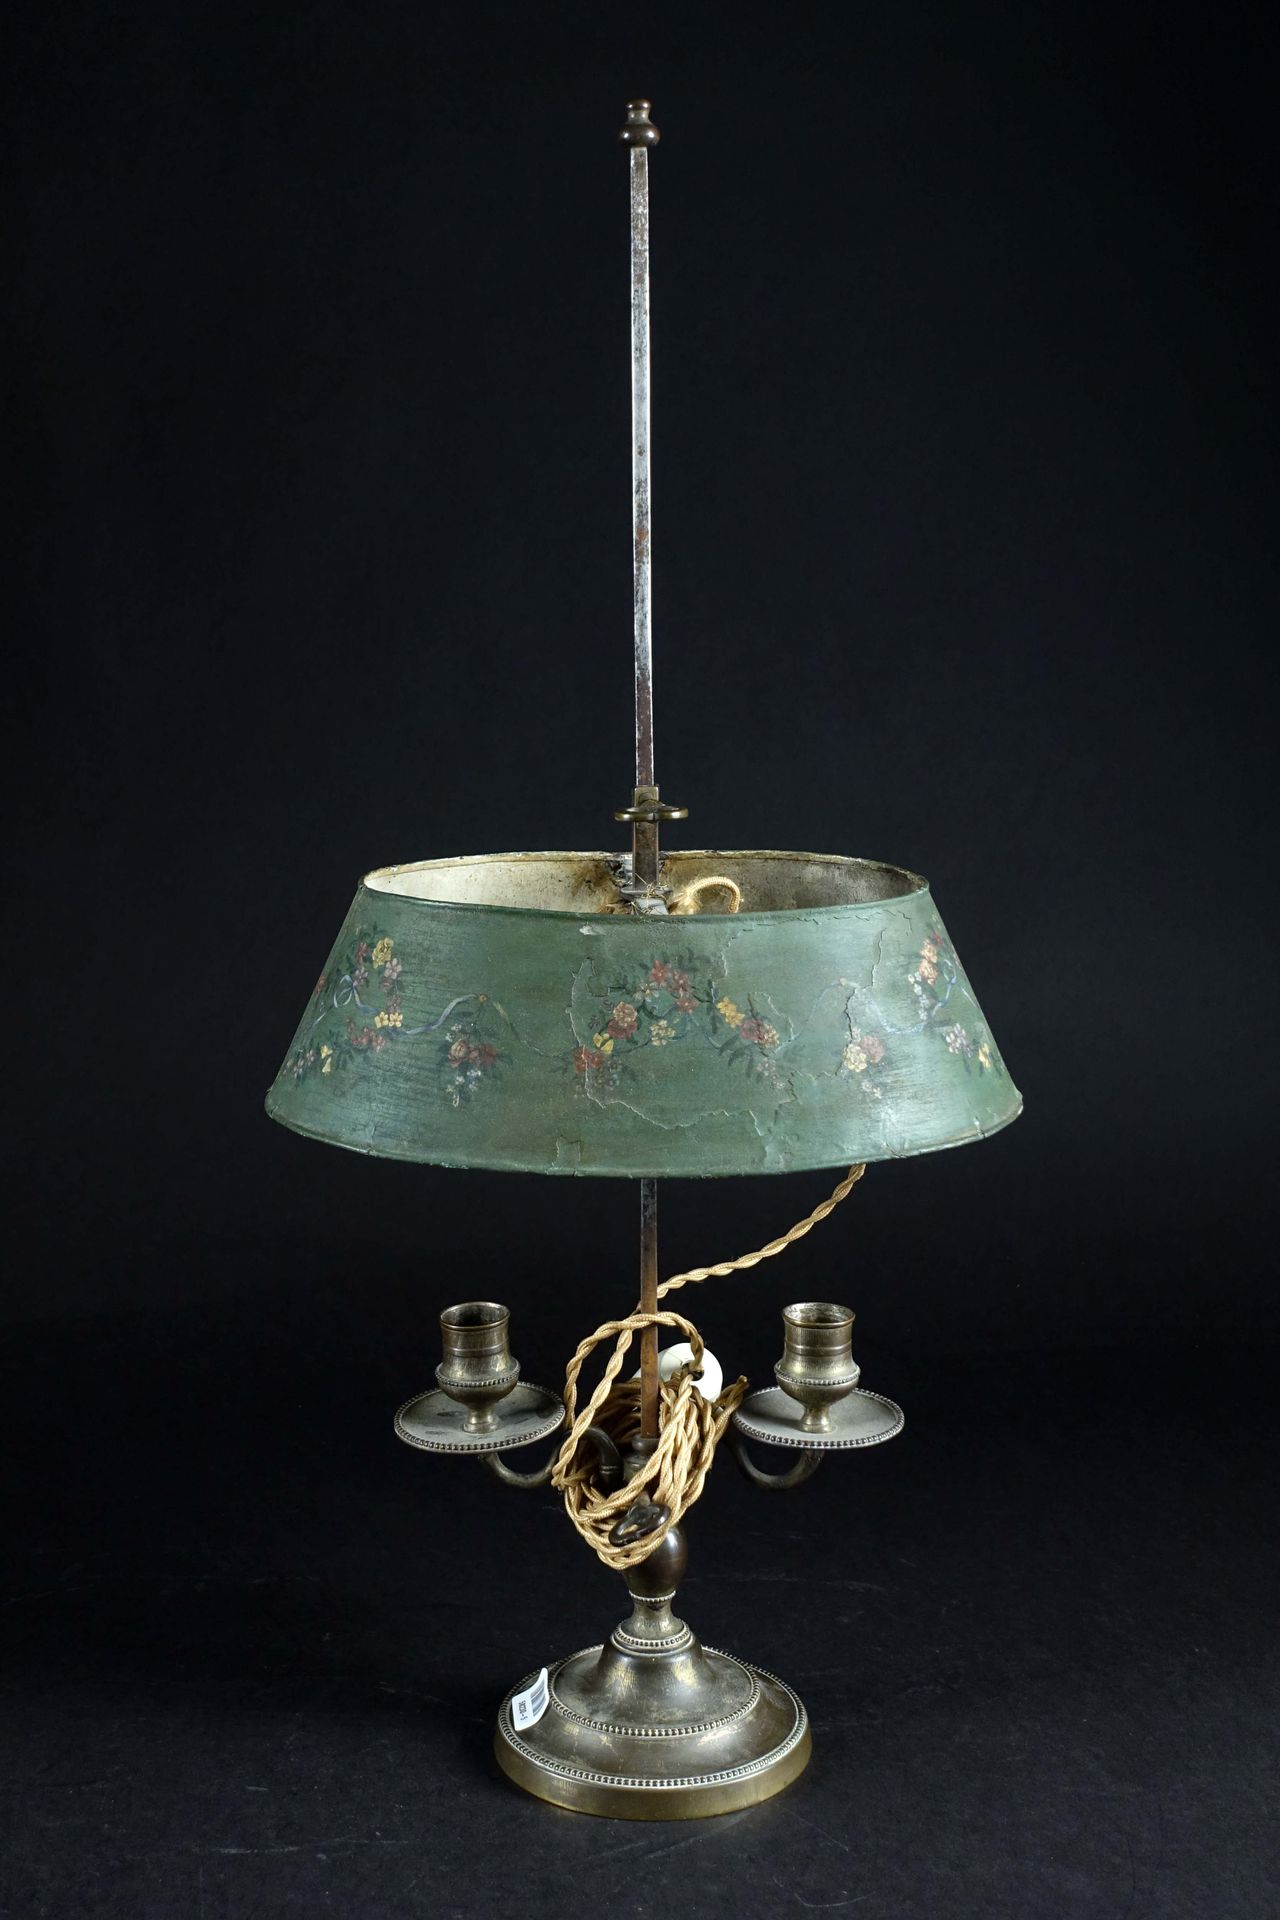 D’époque Louis XVI. Small hot water bottle lamp, with two lights, topped by a la&hellip;